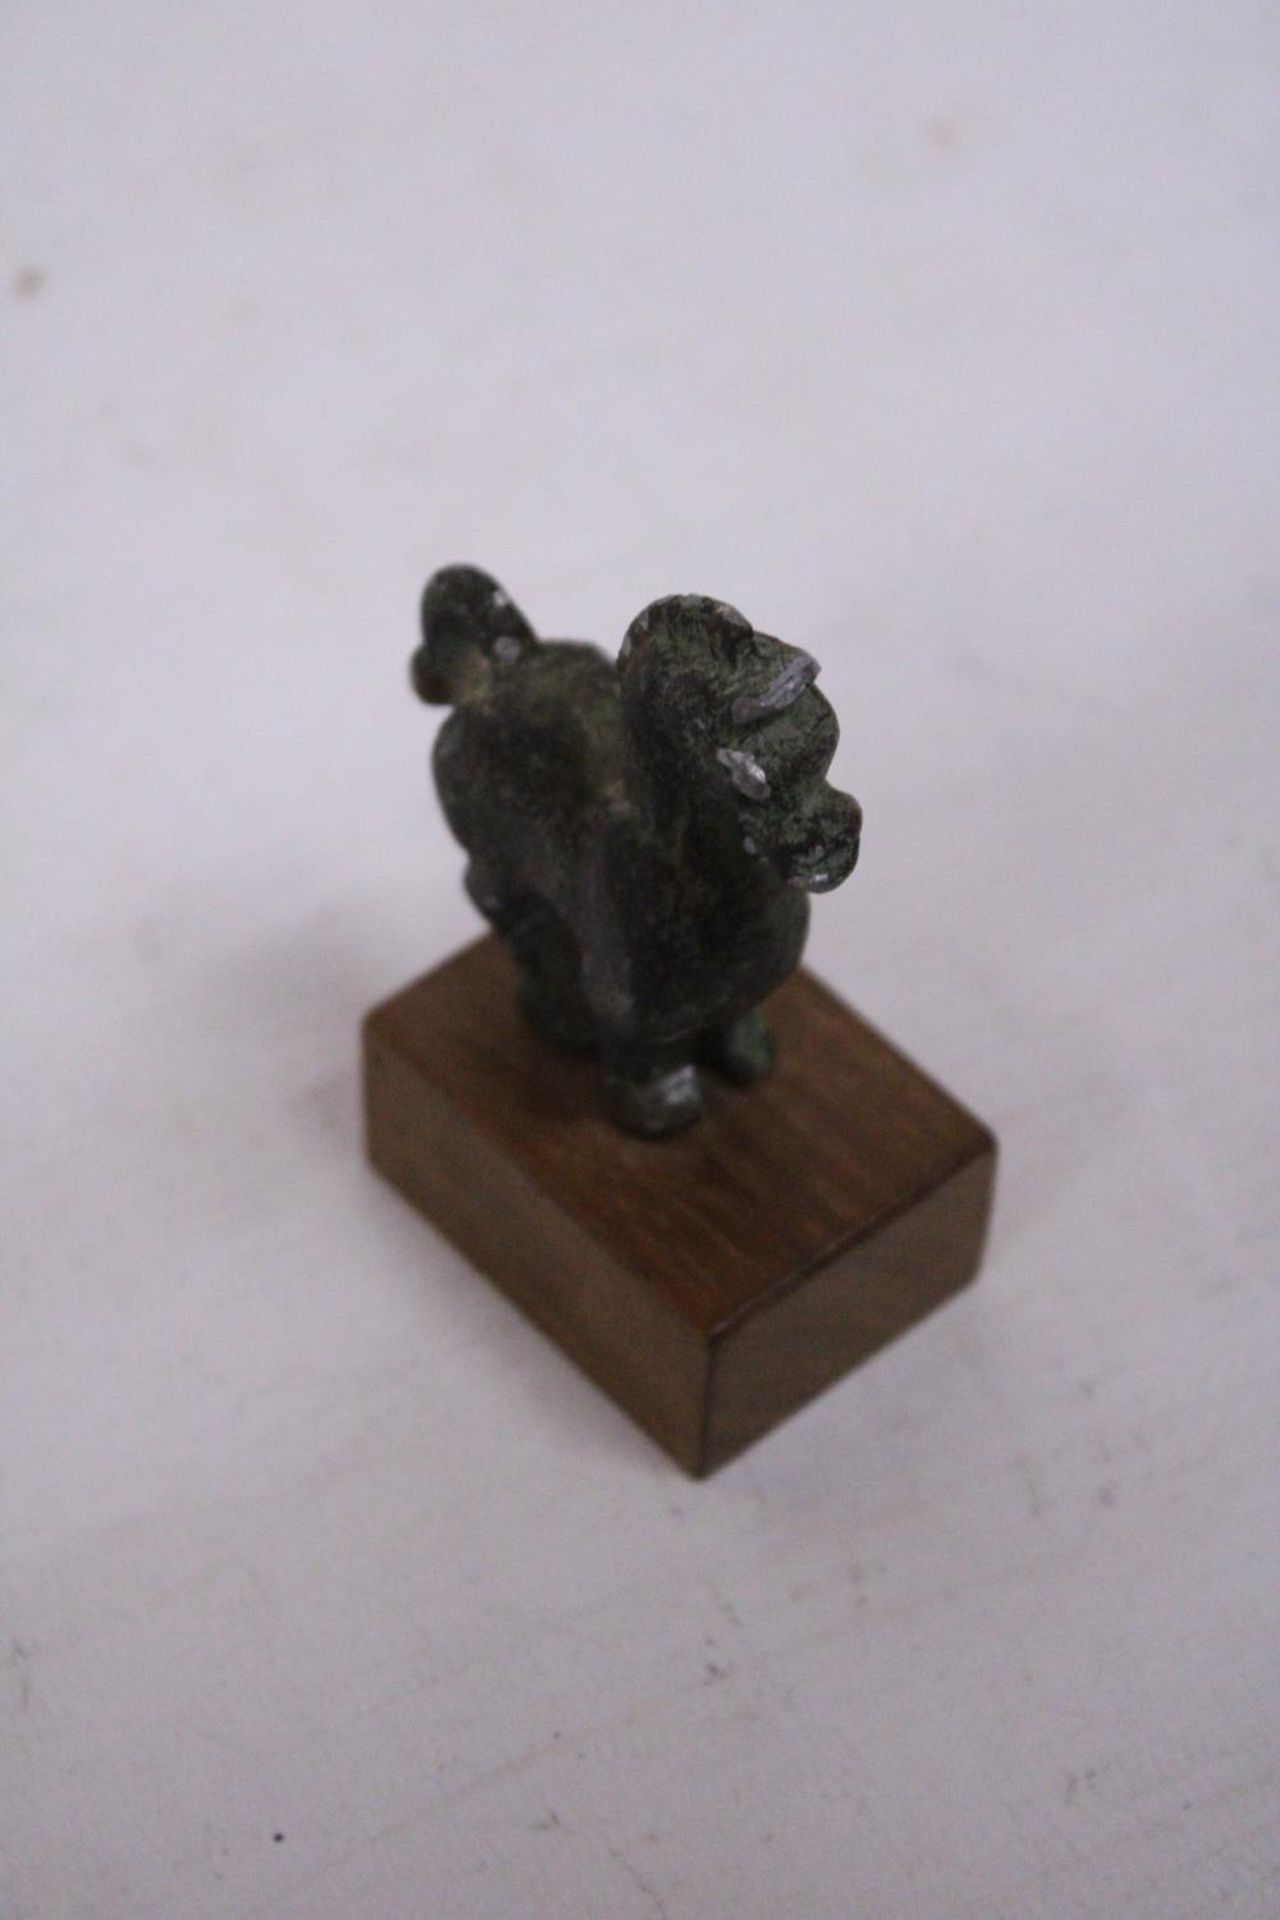 A REPRODUCTION BRONZE OF A CHINESE HAN MING HORSE FROM THE ART INSTITUTE OF CHICAGO ALVA STUDIOS - 8 - Bild 3 aus 3